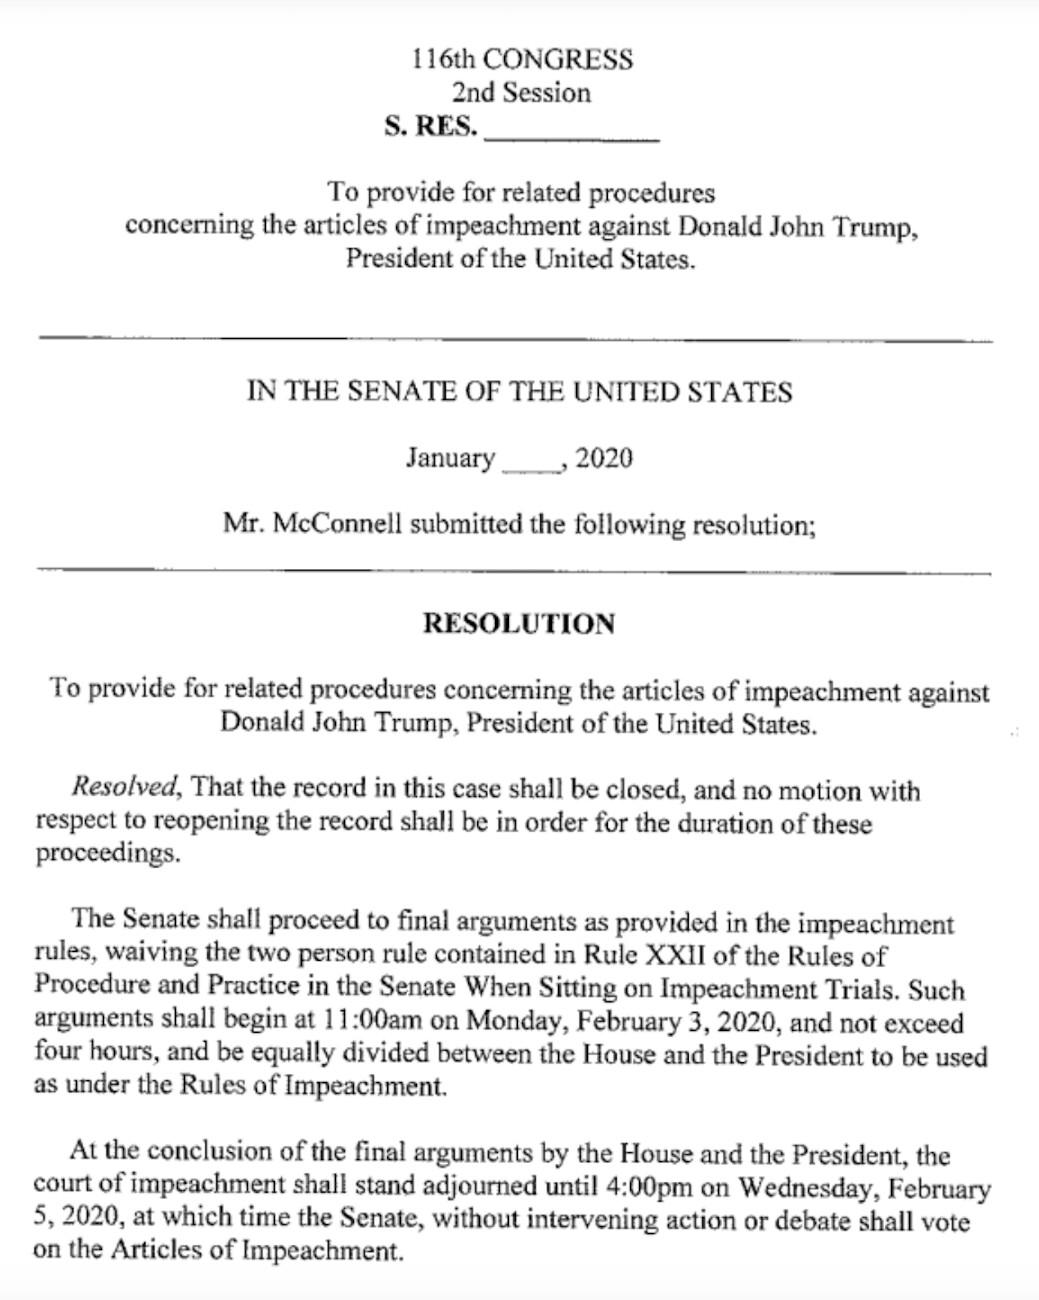 Senate Majority Leader Mitch McConnell's resolution laying out procedures on articles of impeachment in the trial of President Donald Trump.